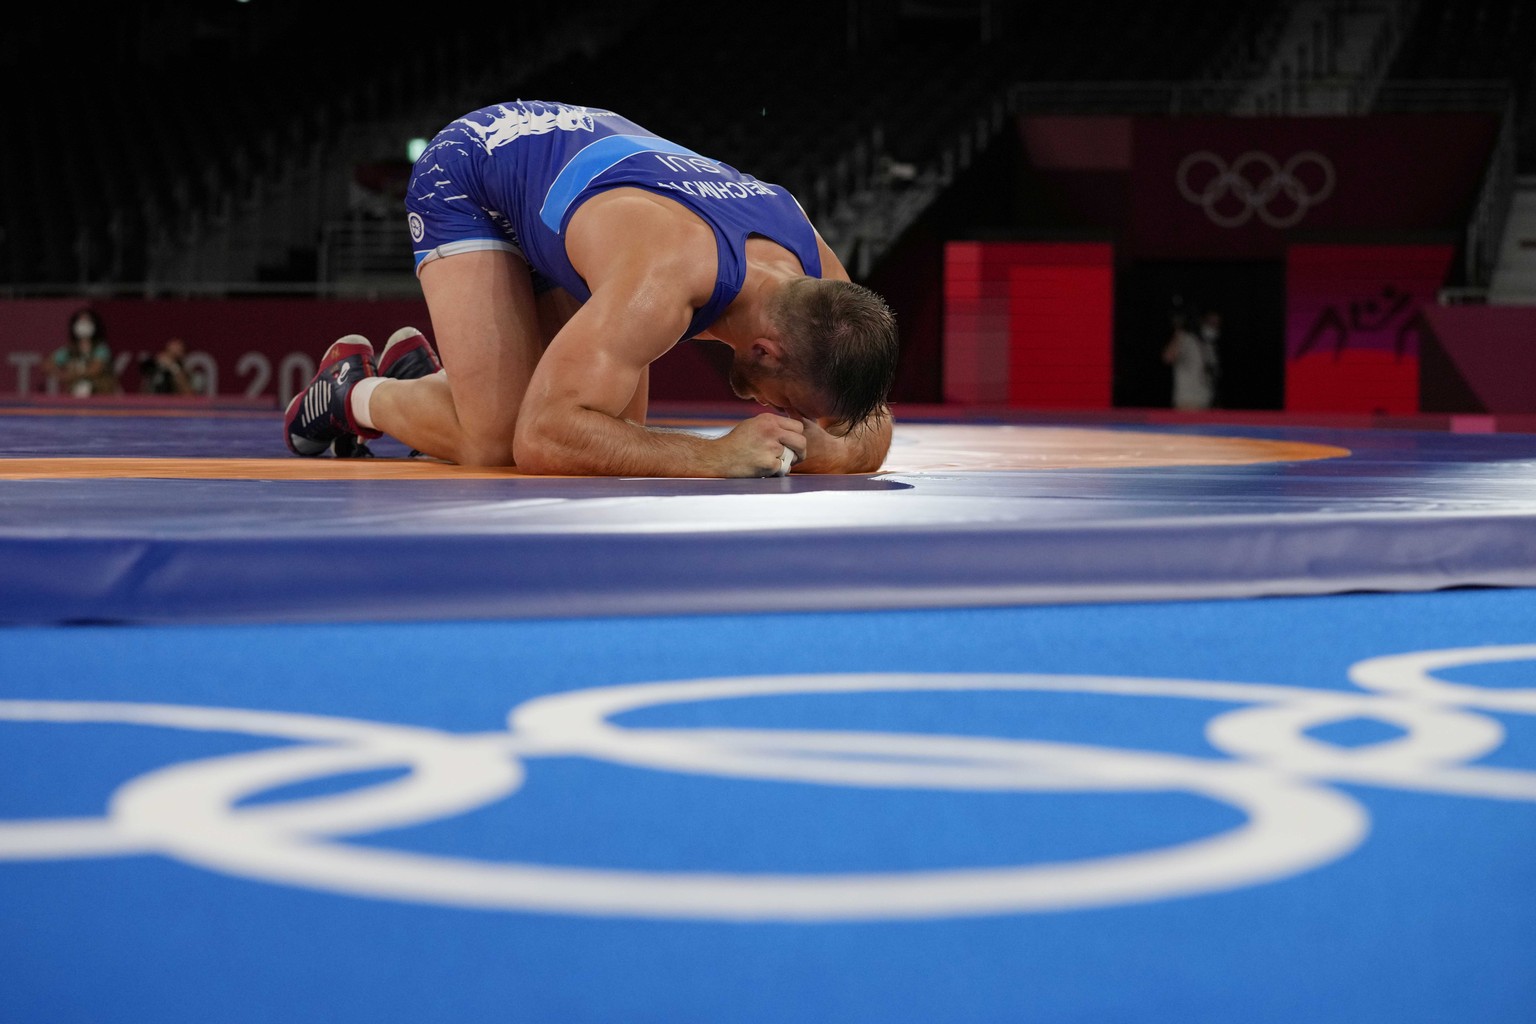 Switzerland&#039;s Stefan Reichmuth kneels after he lost against Uzbekistan&#039;s Shapiev Jayrail during the men&#039;s 86kg Freestyle wrestling repechage match at the 2020 Summer Olympics, Thursday, ...